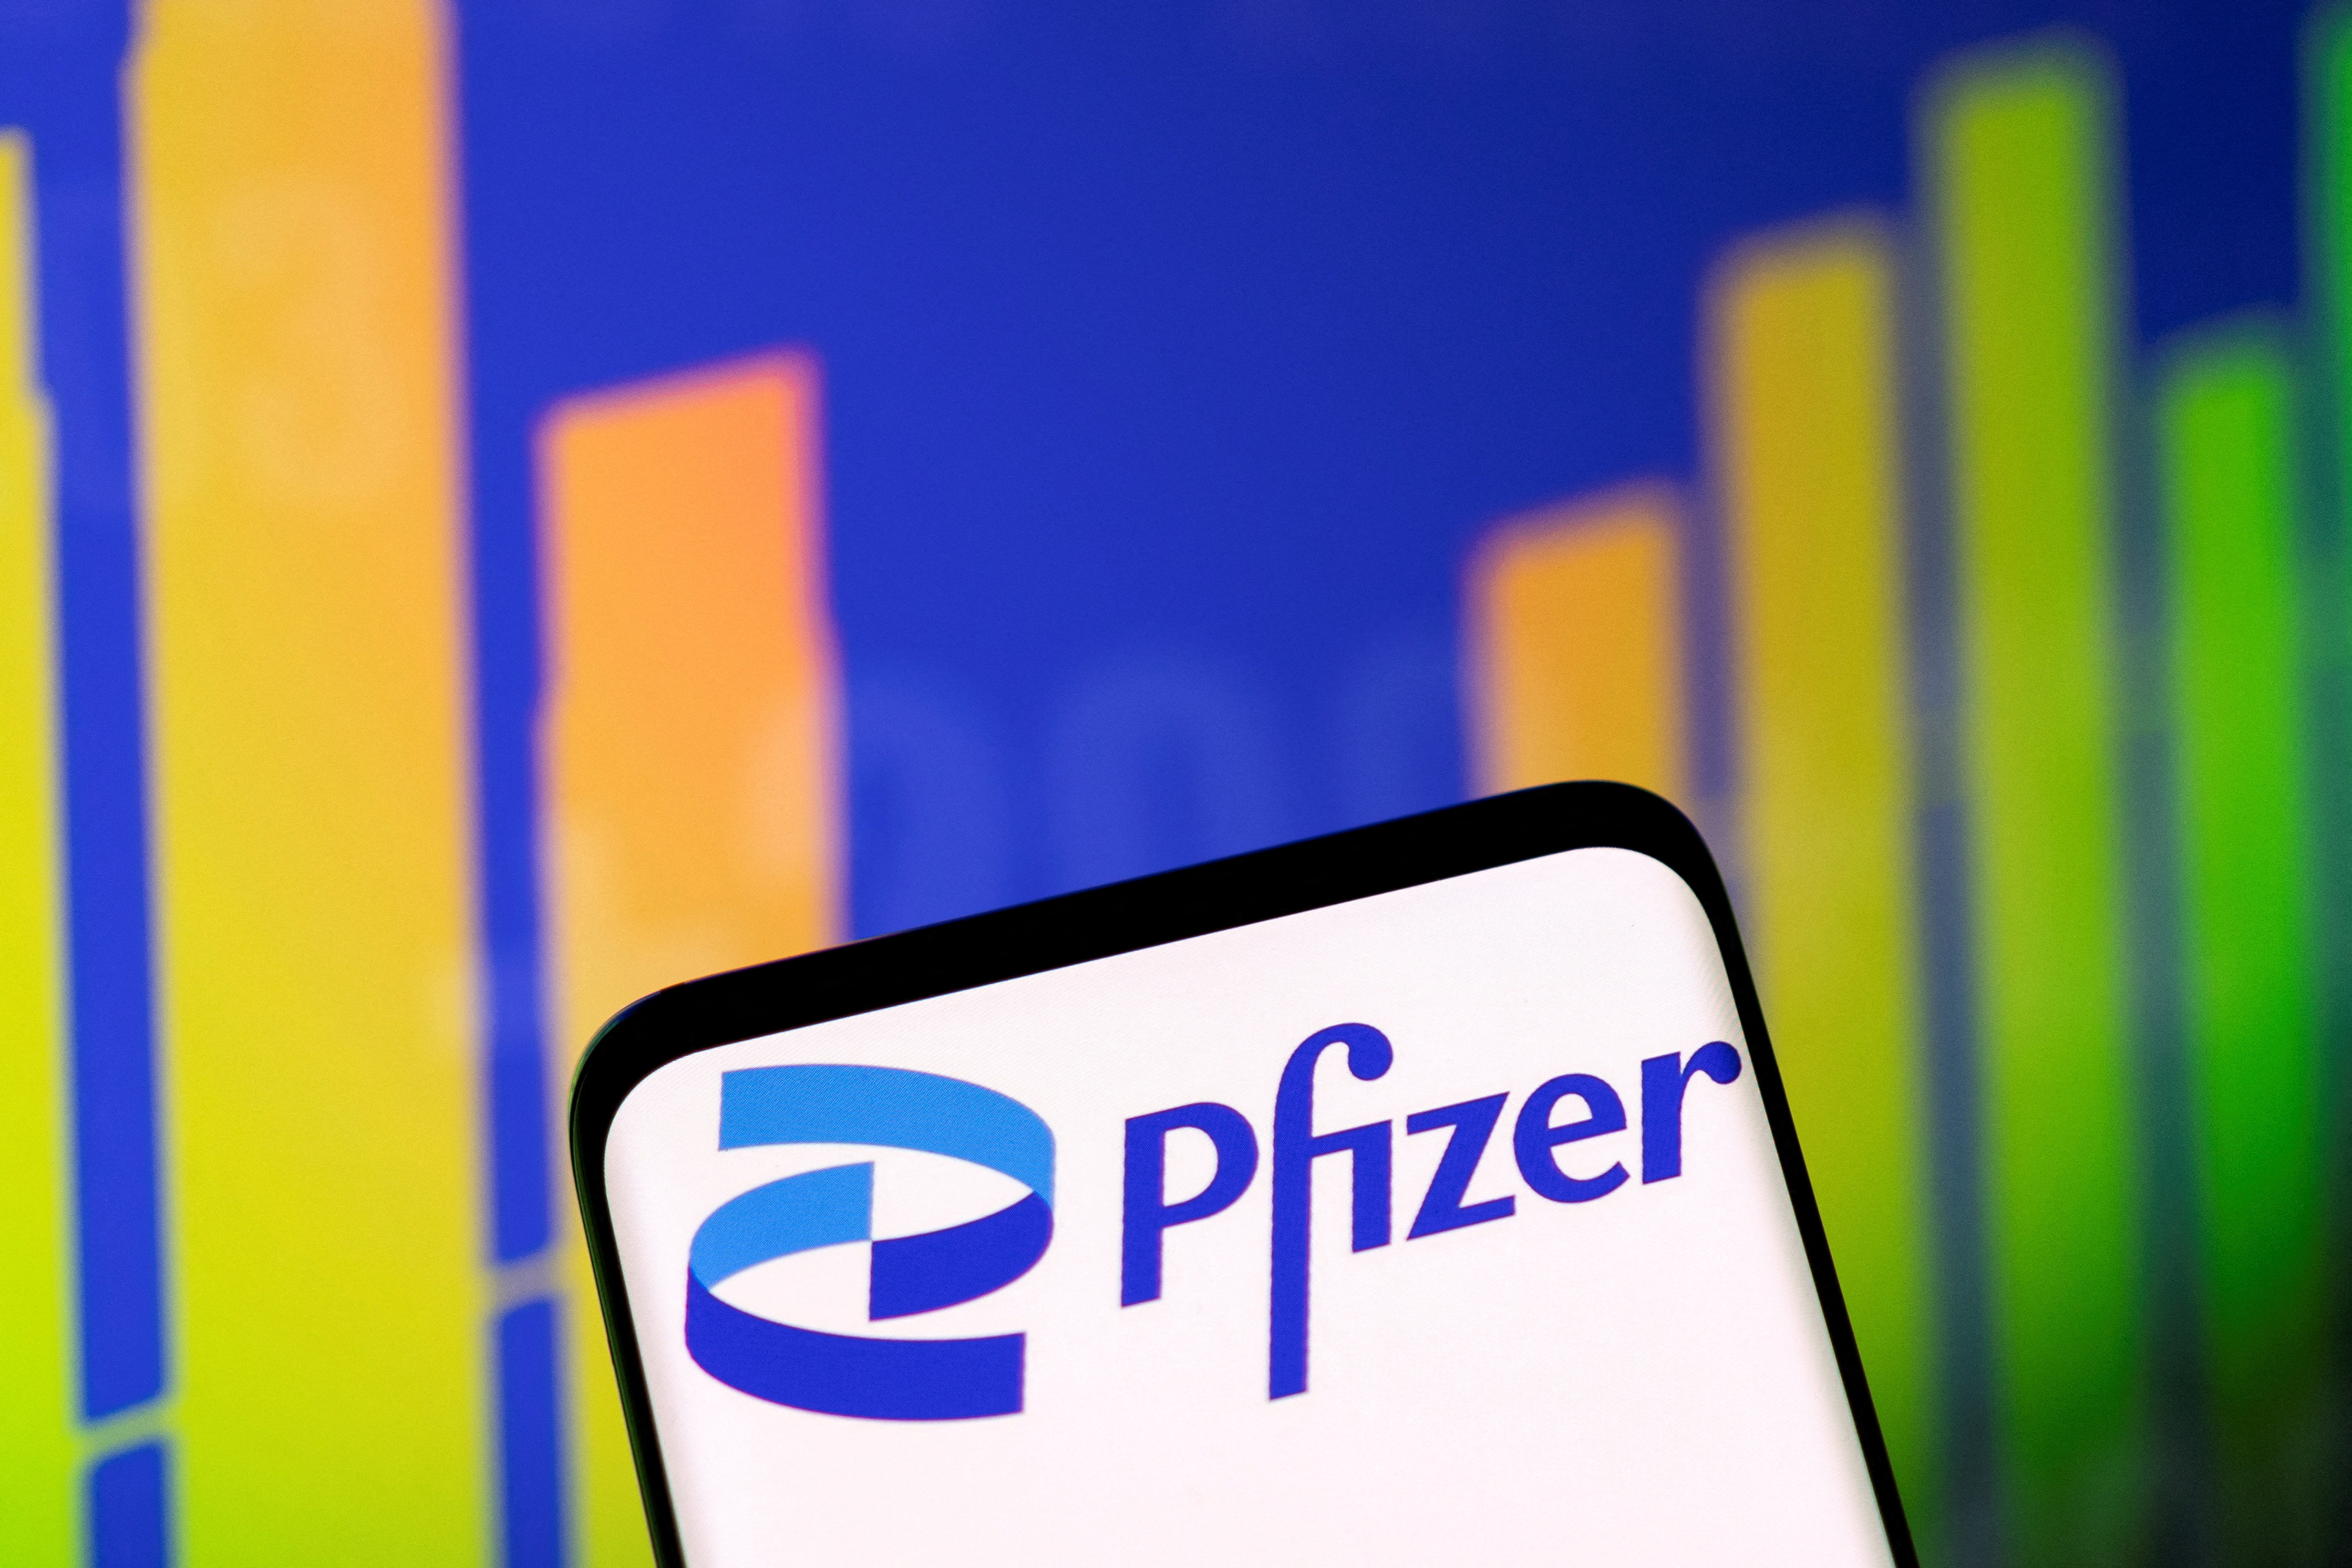 Flush with cash, Pfizer buys Global Blood Therapeutics for .4 billion